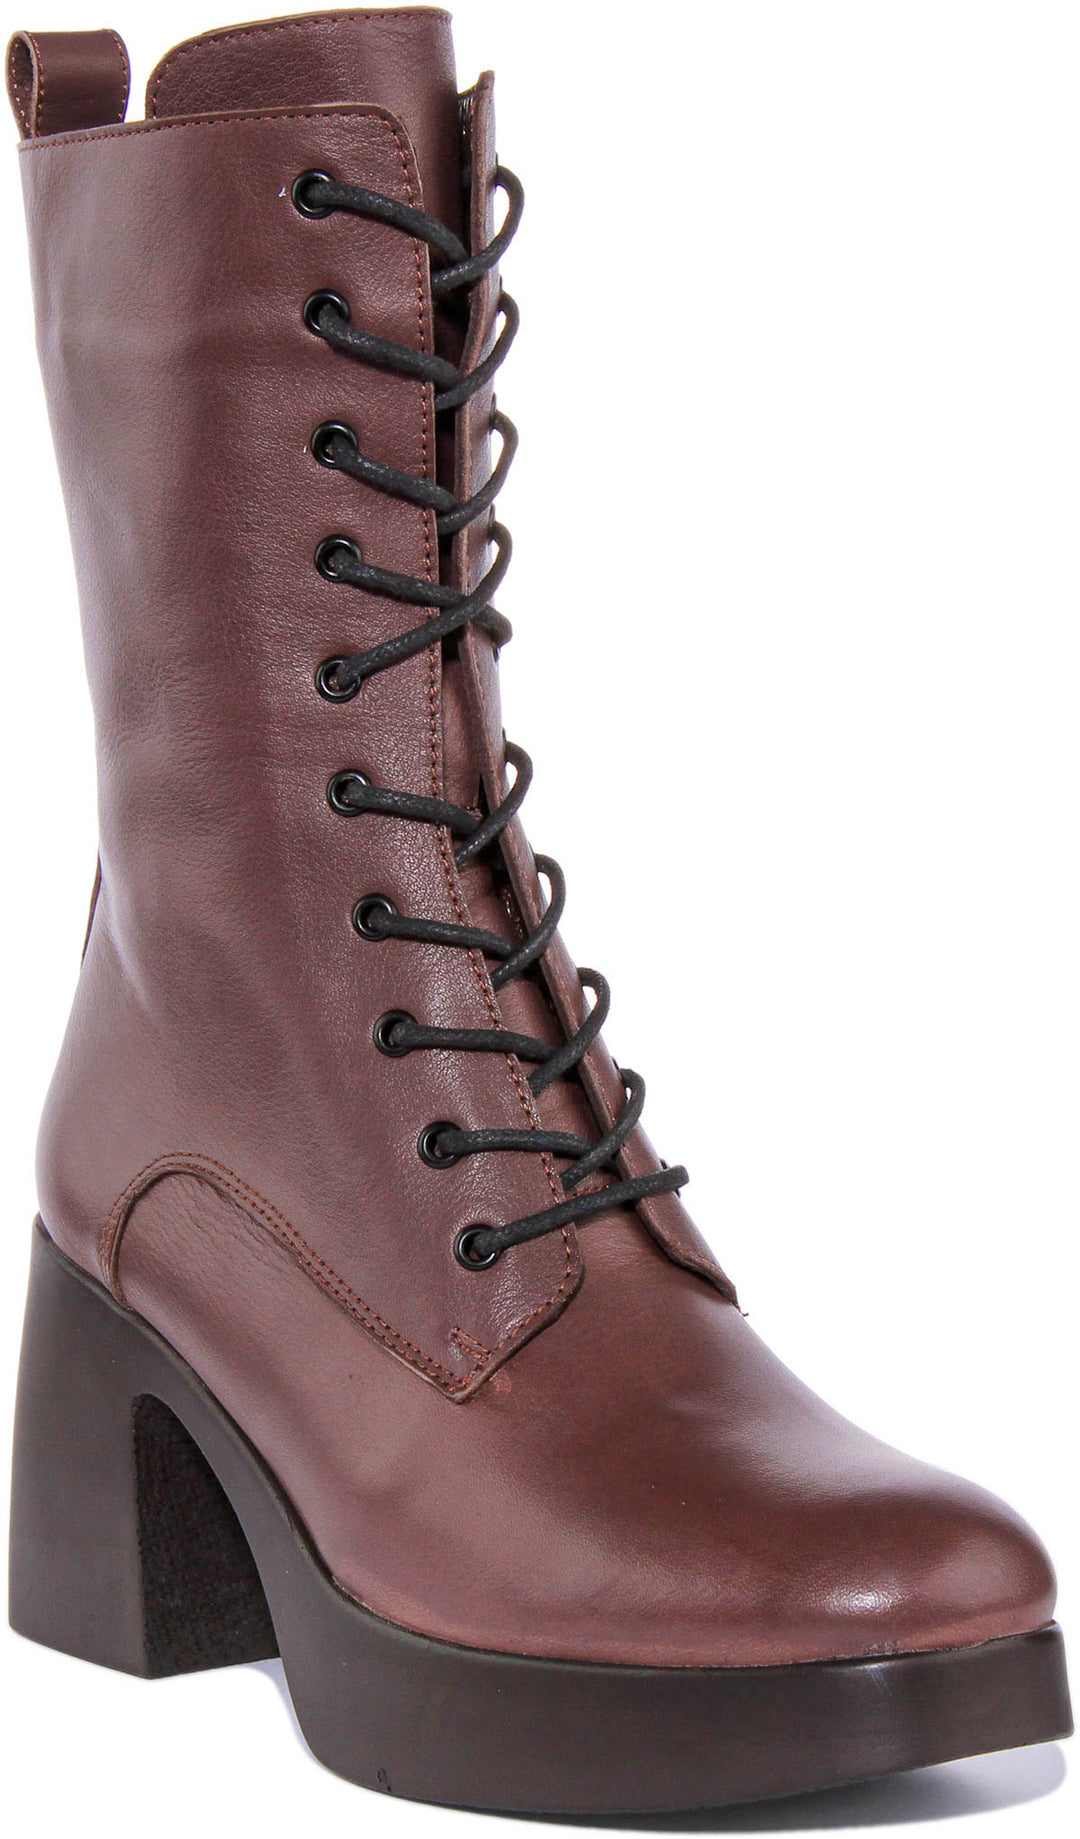 Frida Lace up High Boot In Brown